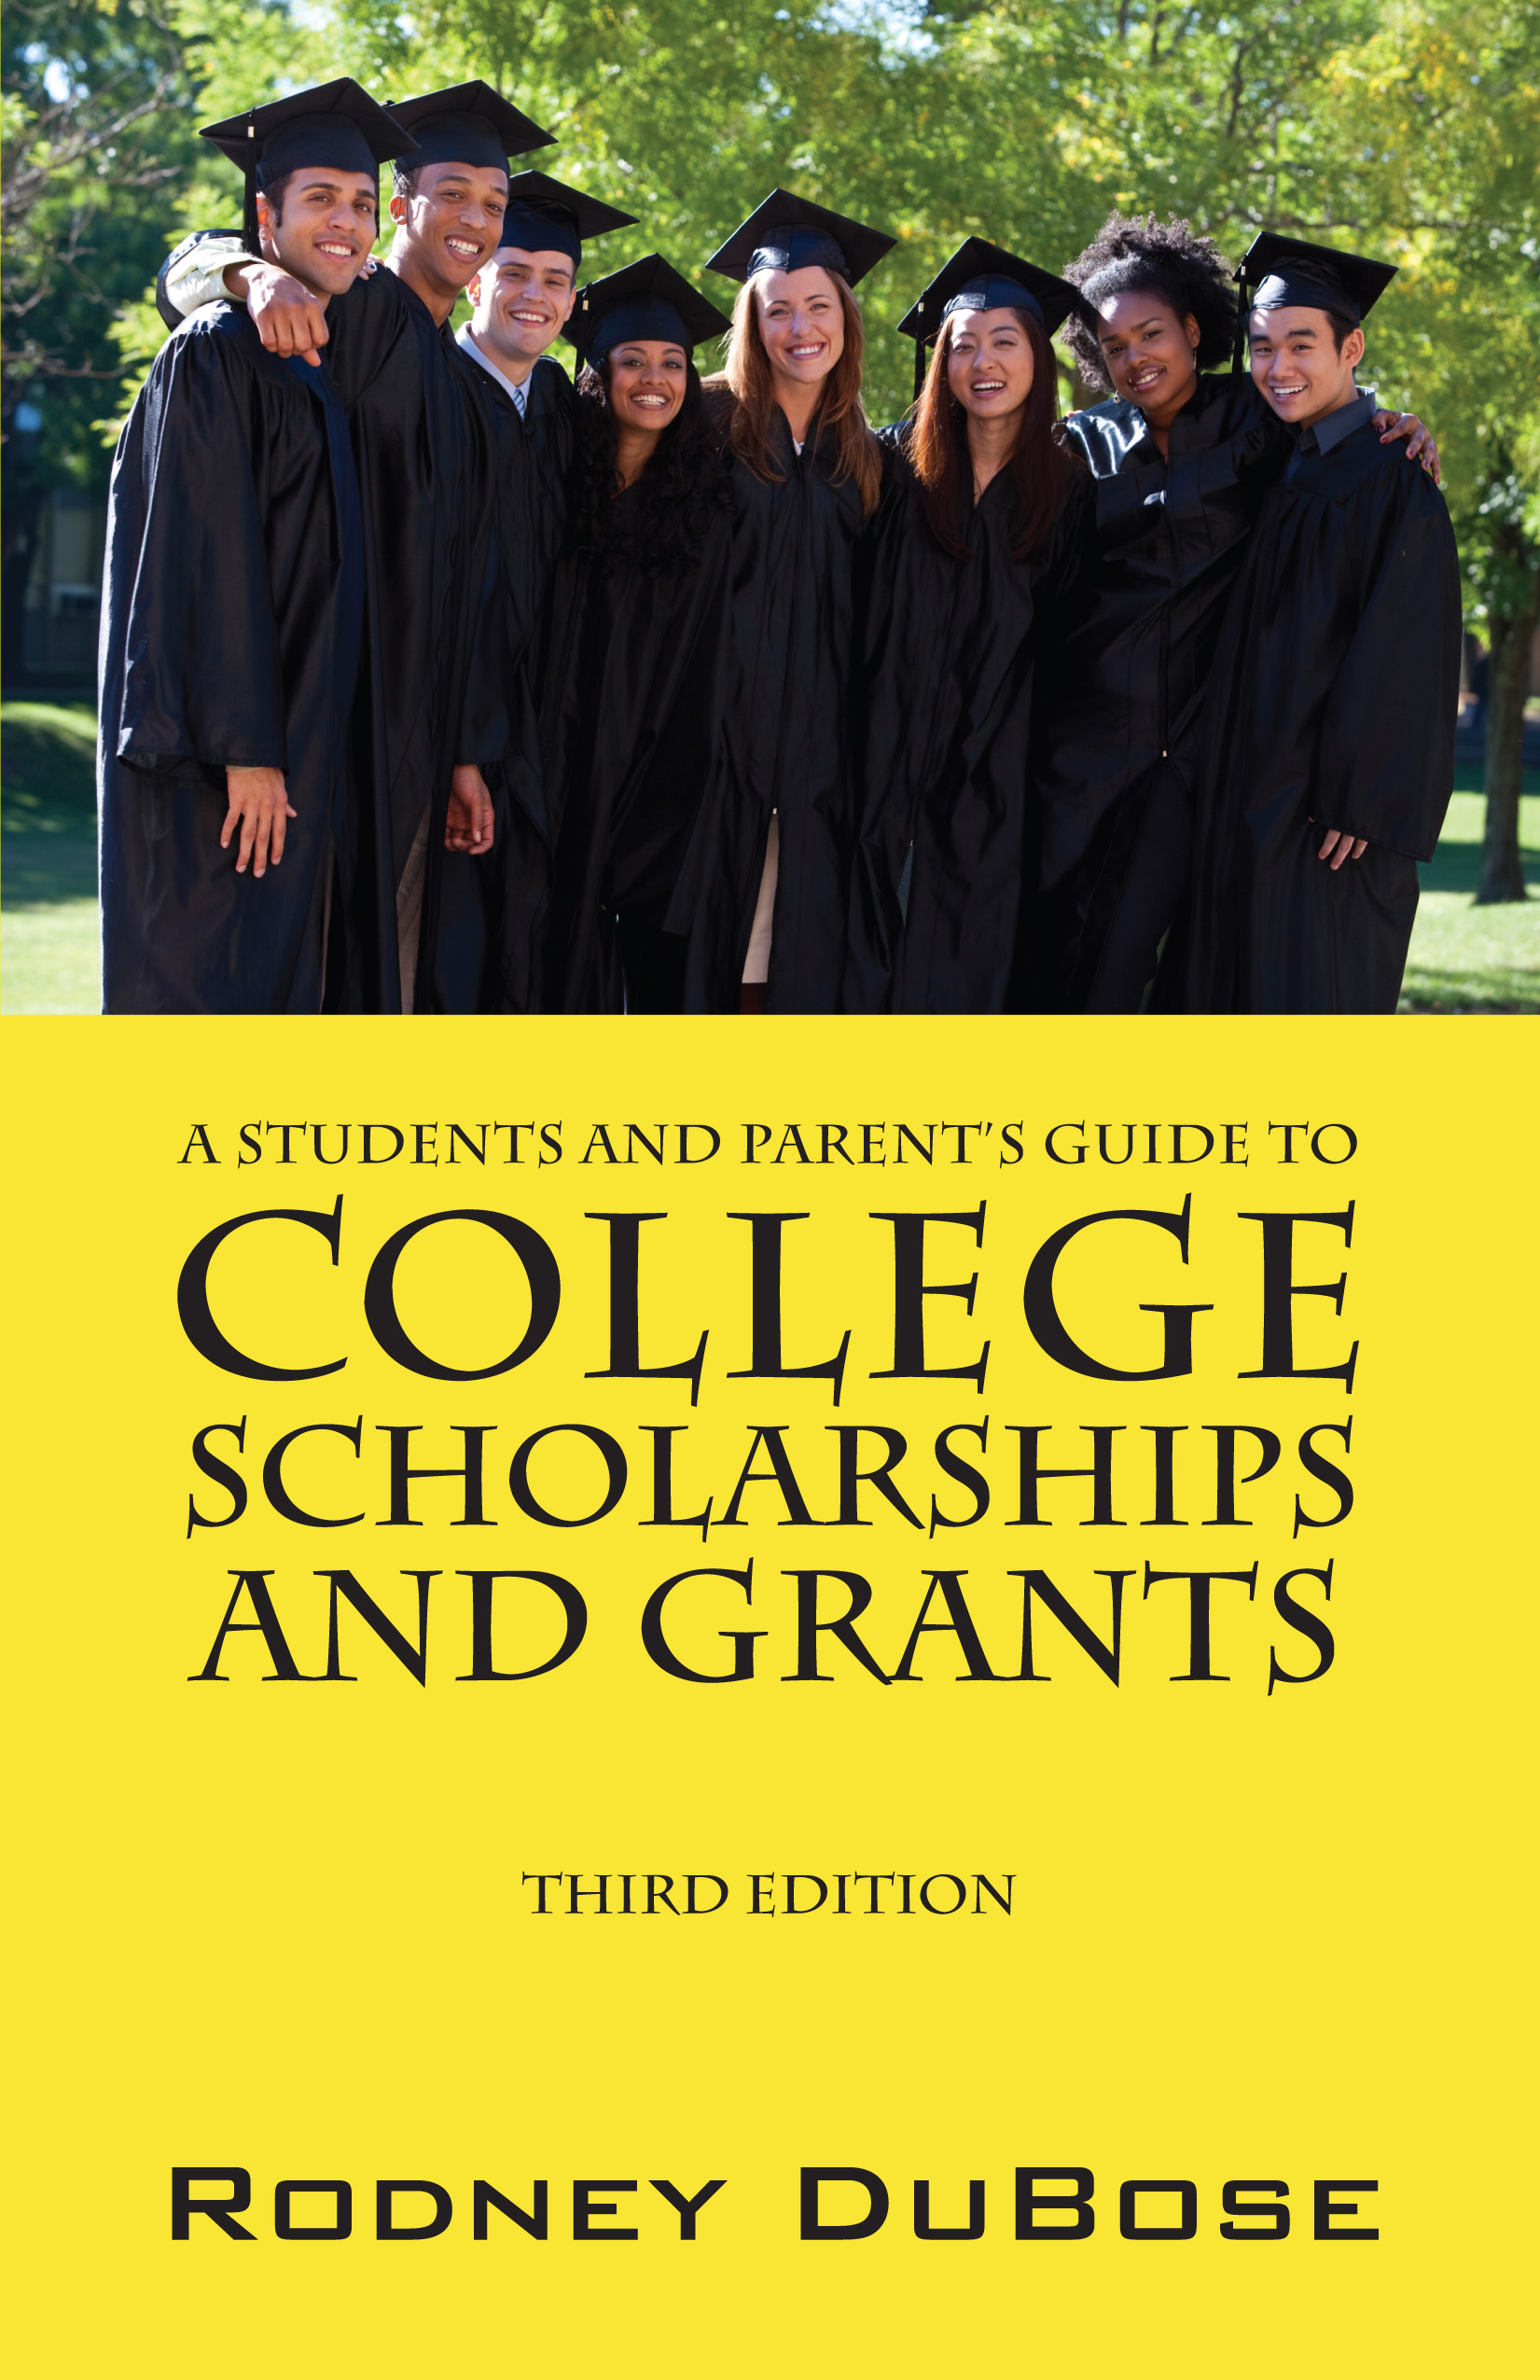 A Student and Parents Guide to College Scholarships and Grants